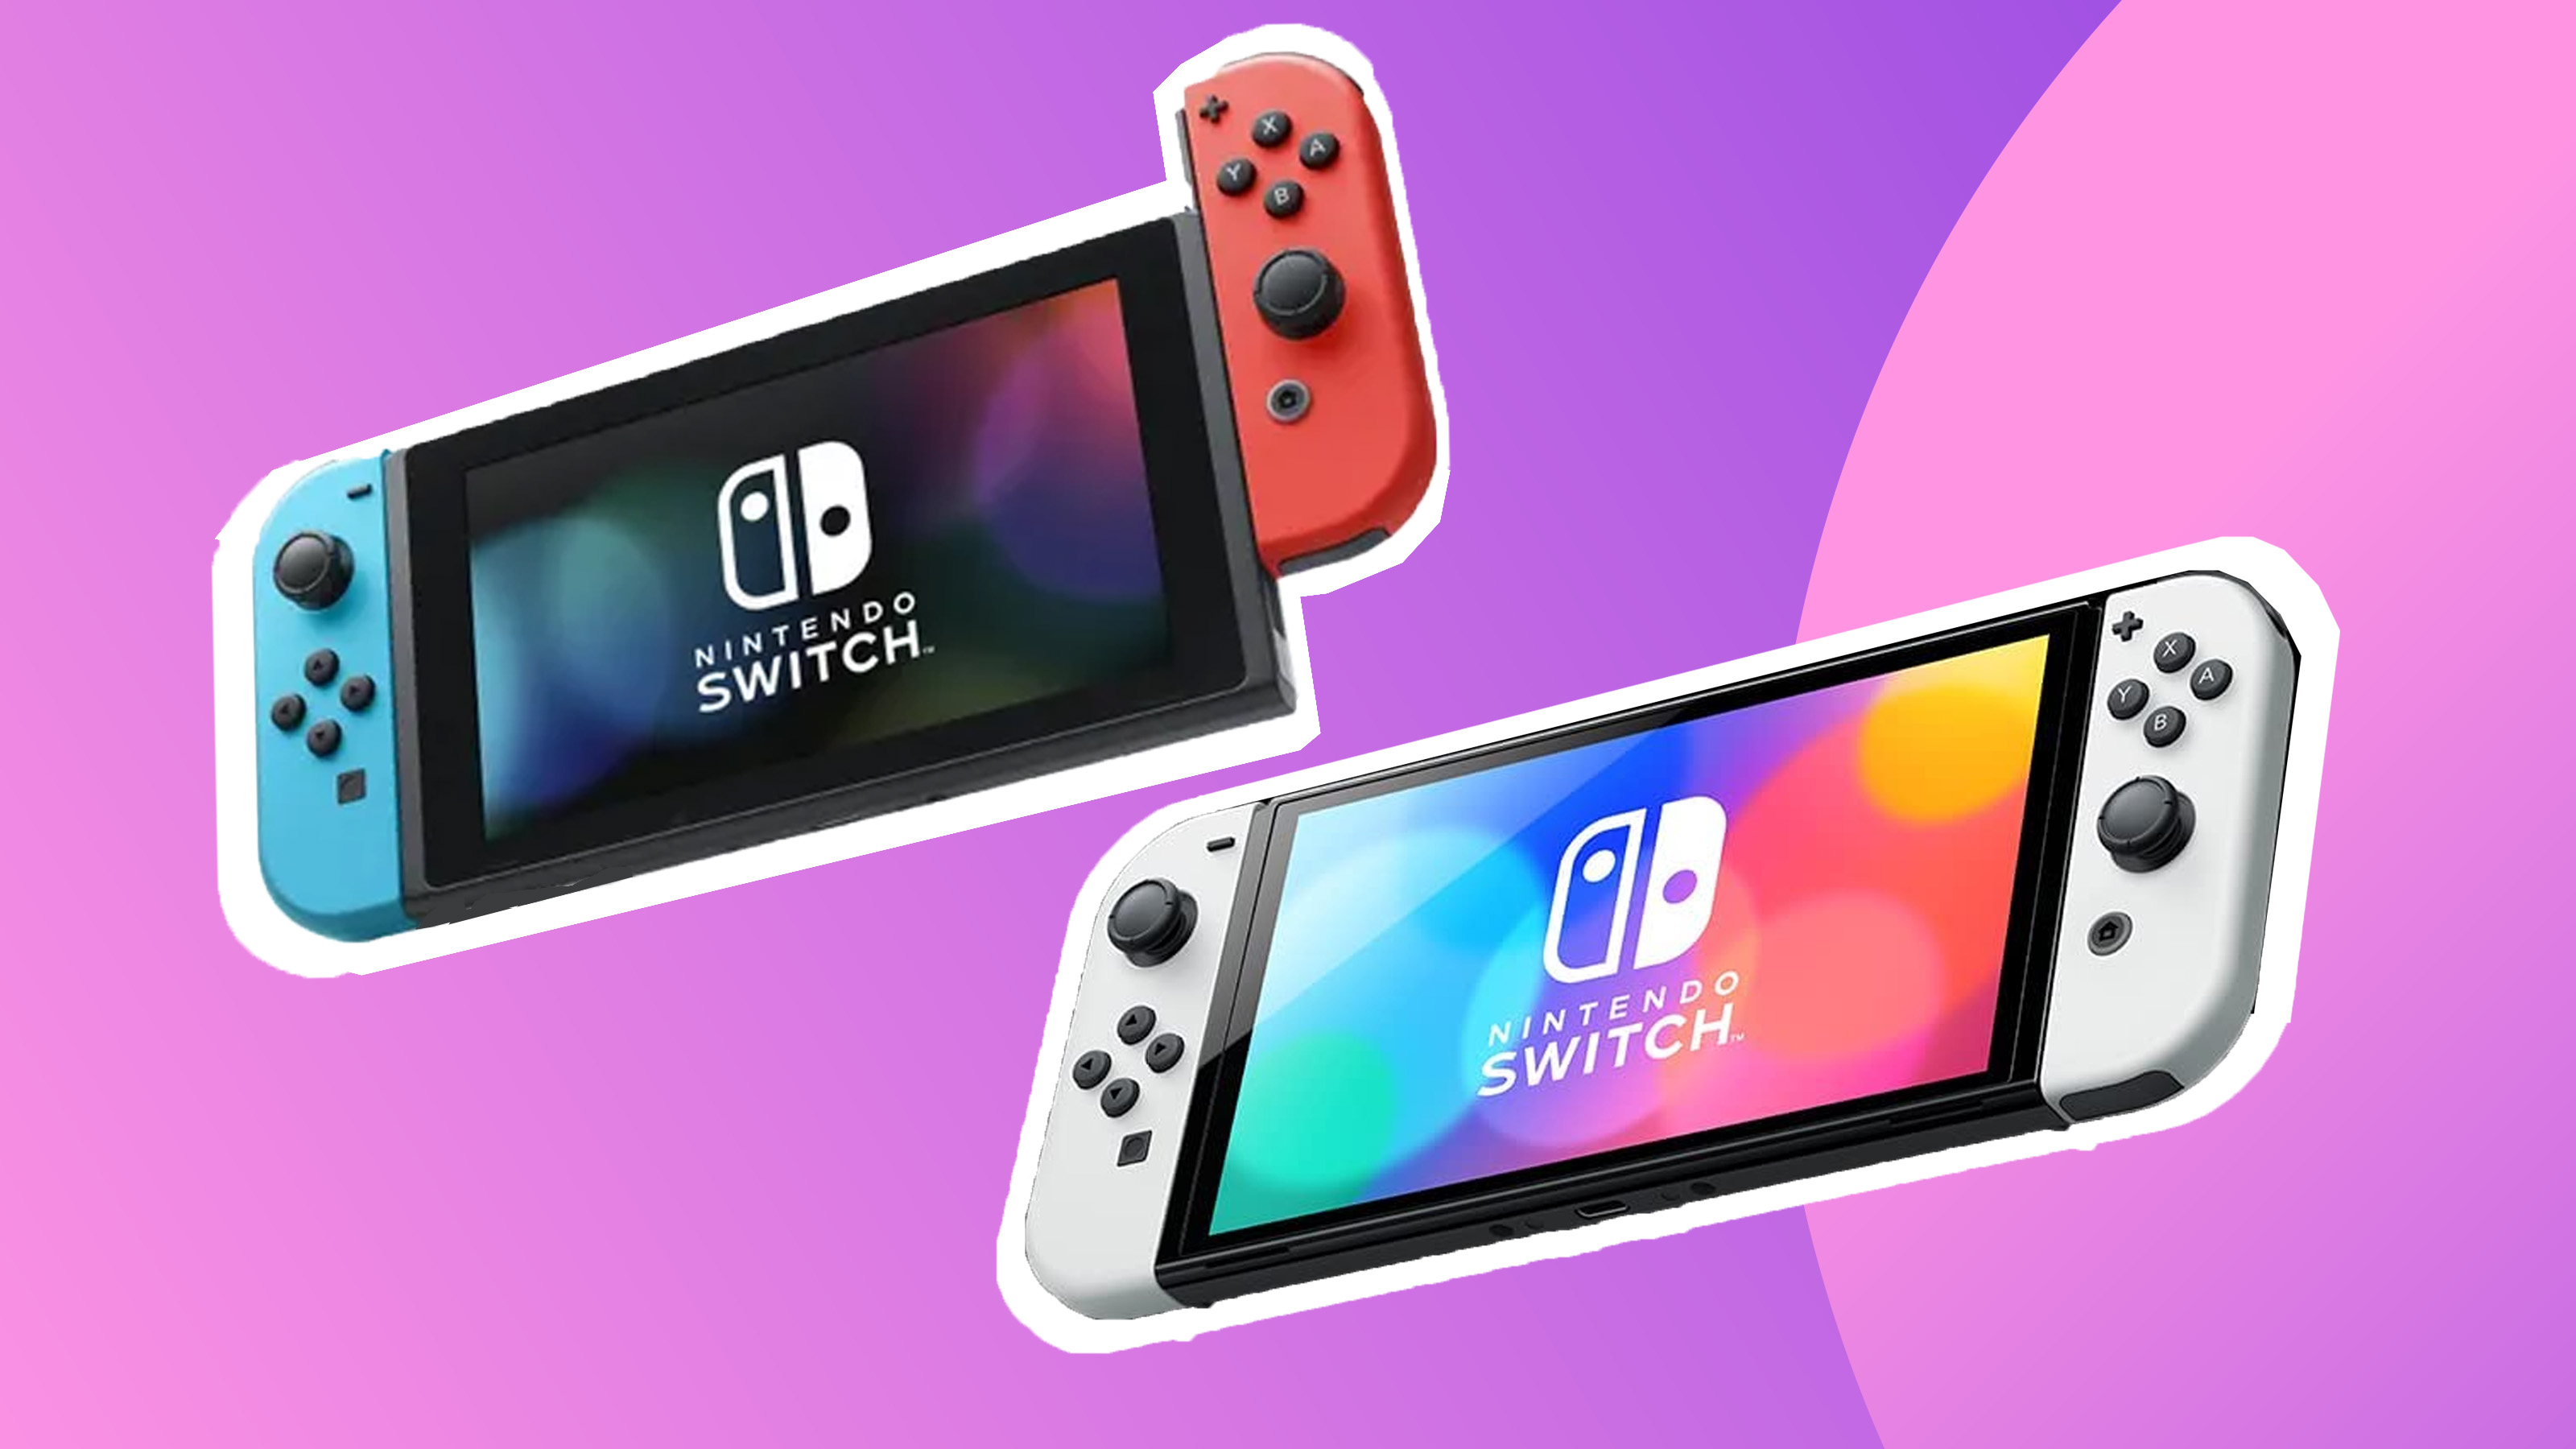 Product shots of the switch and switch oled